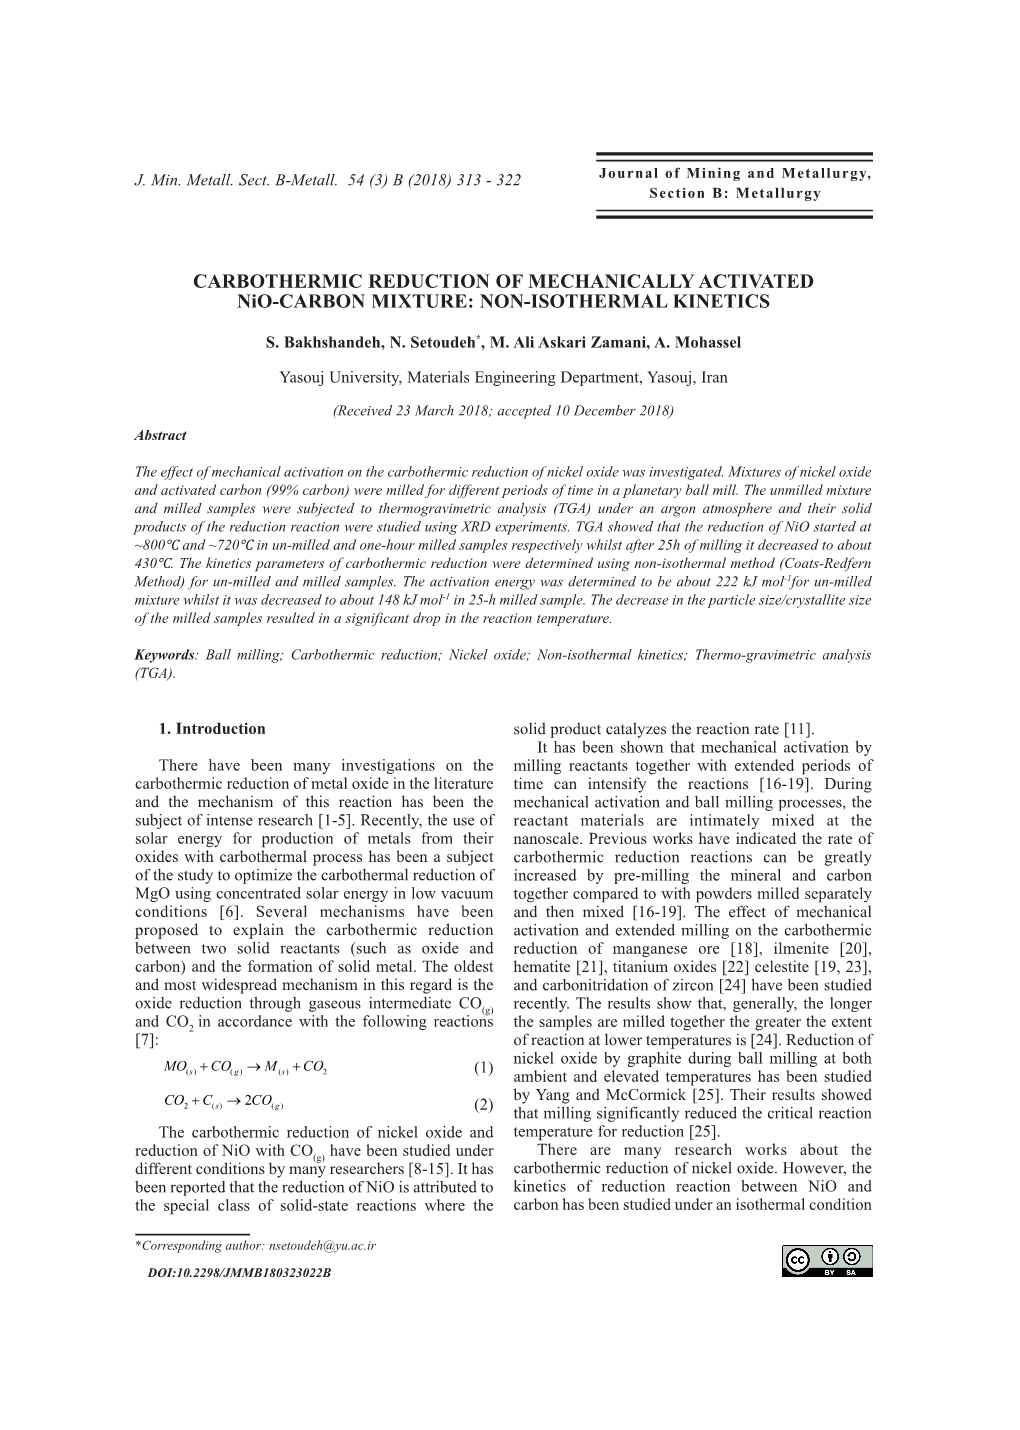 CARBOTHERMIC REDUCTION of MECHANICALLY ACTIVATED Nio-CARBON MIXTURE: NON-ISOTHERMAL KINETICS